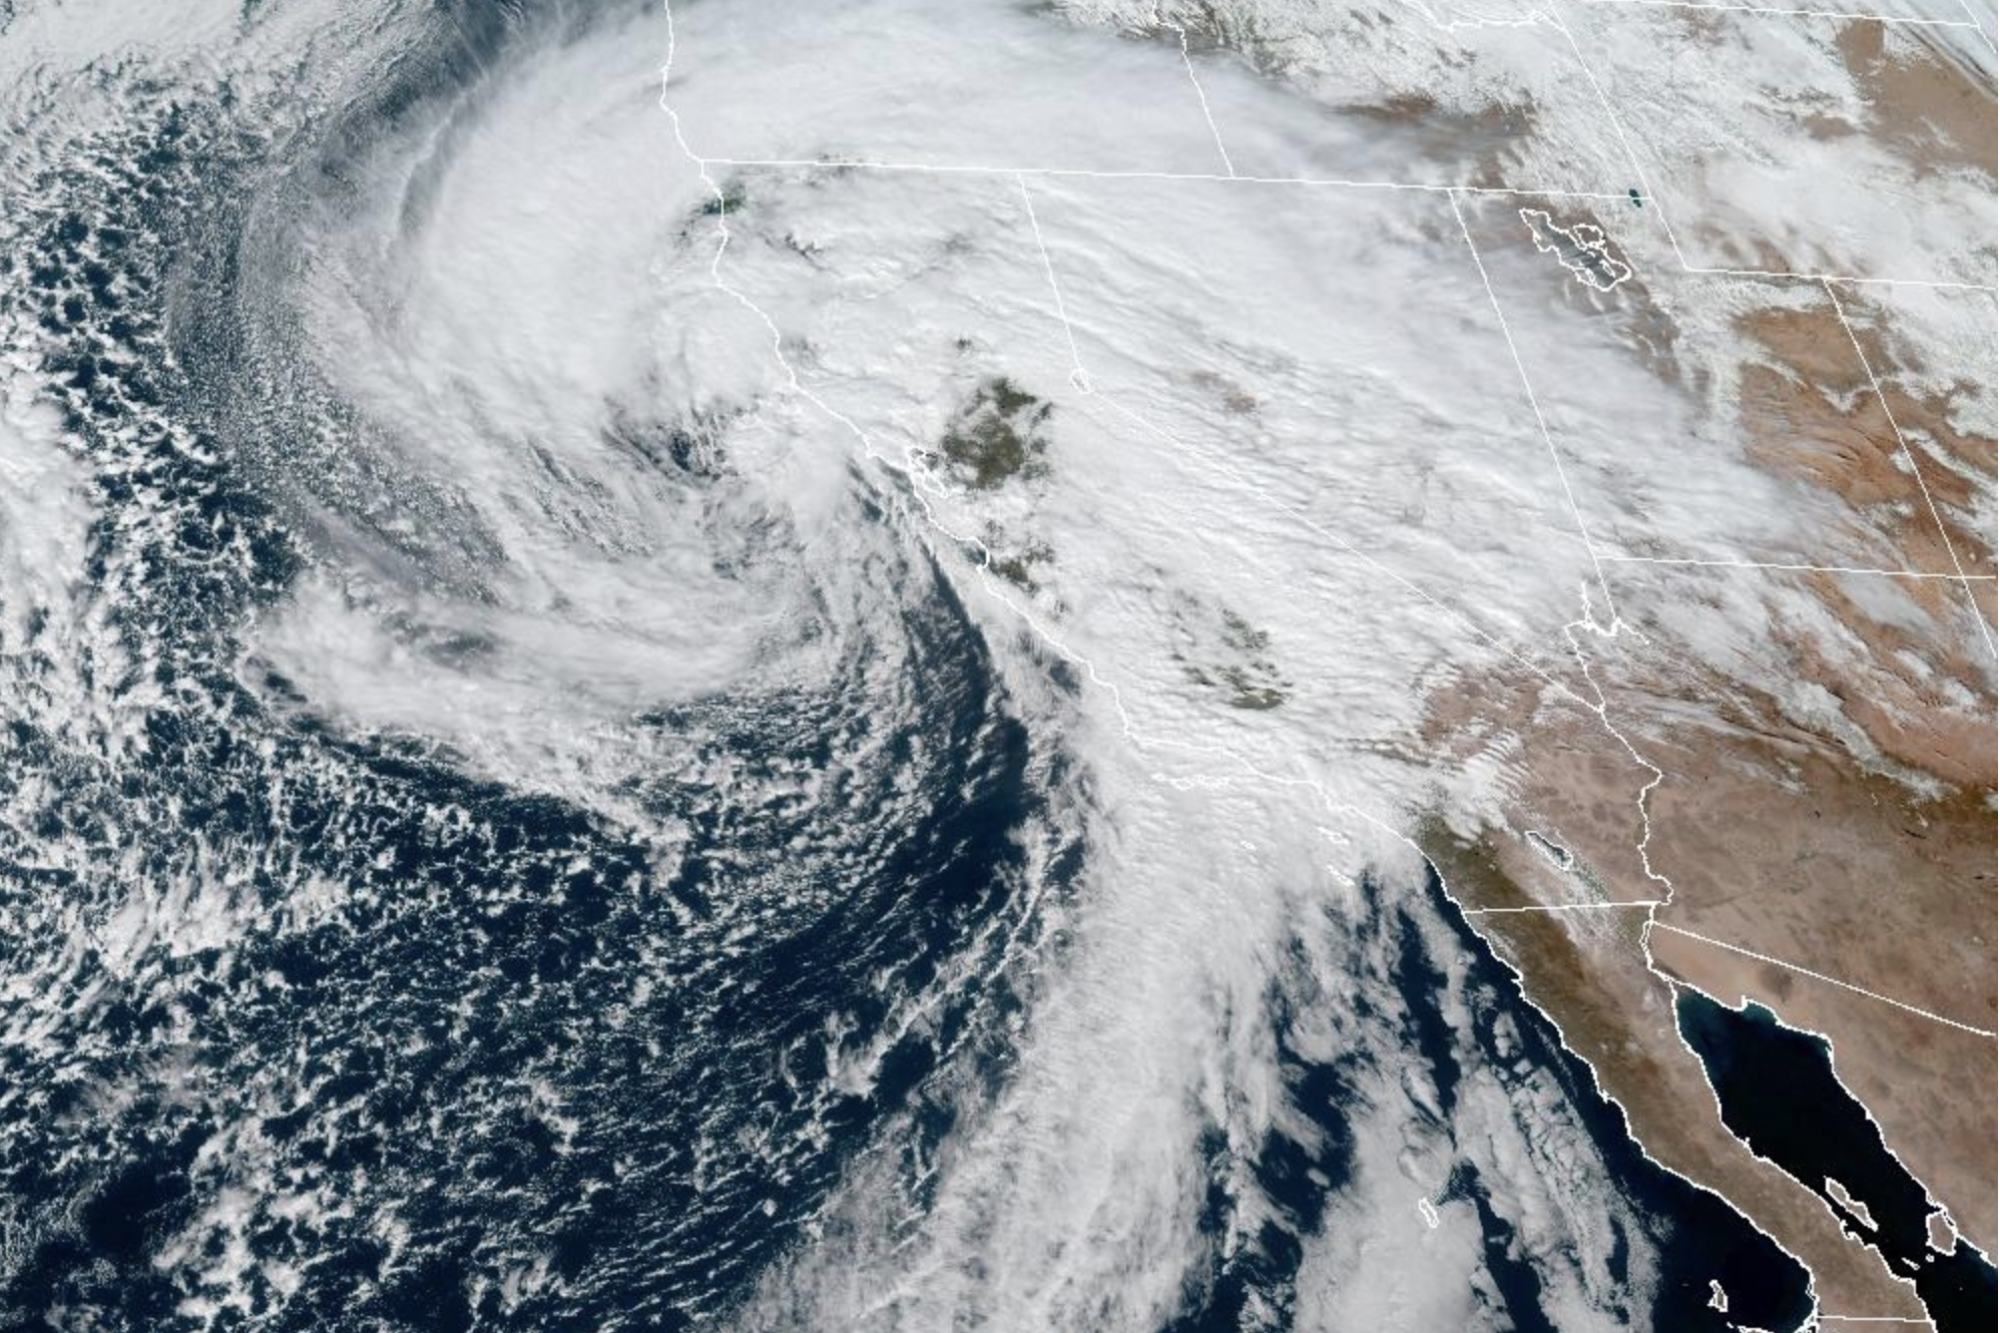 A satellite image shows a powerful storm over California.